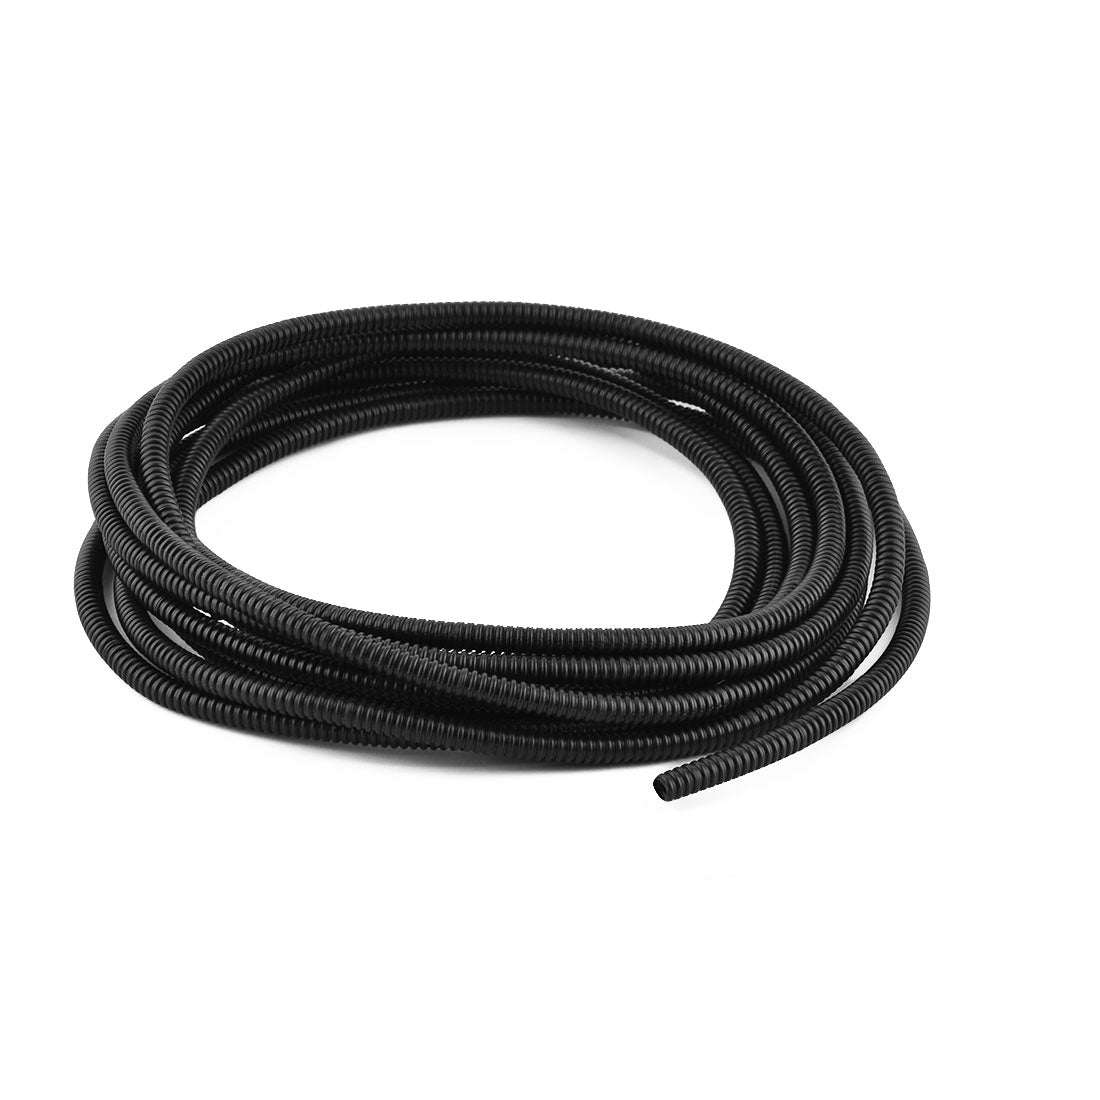 uxcell Uxcell 4.8 M 5 x 7 mm Plastic Flexible Corrugated Conduit Tube for Garden,Office Black